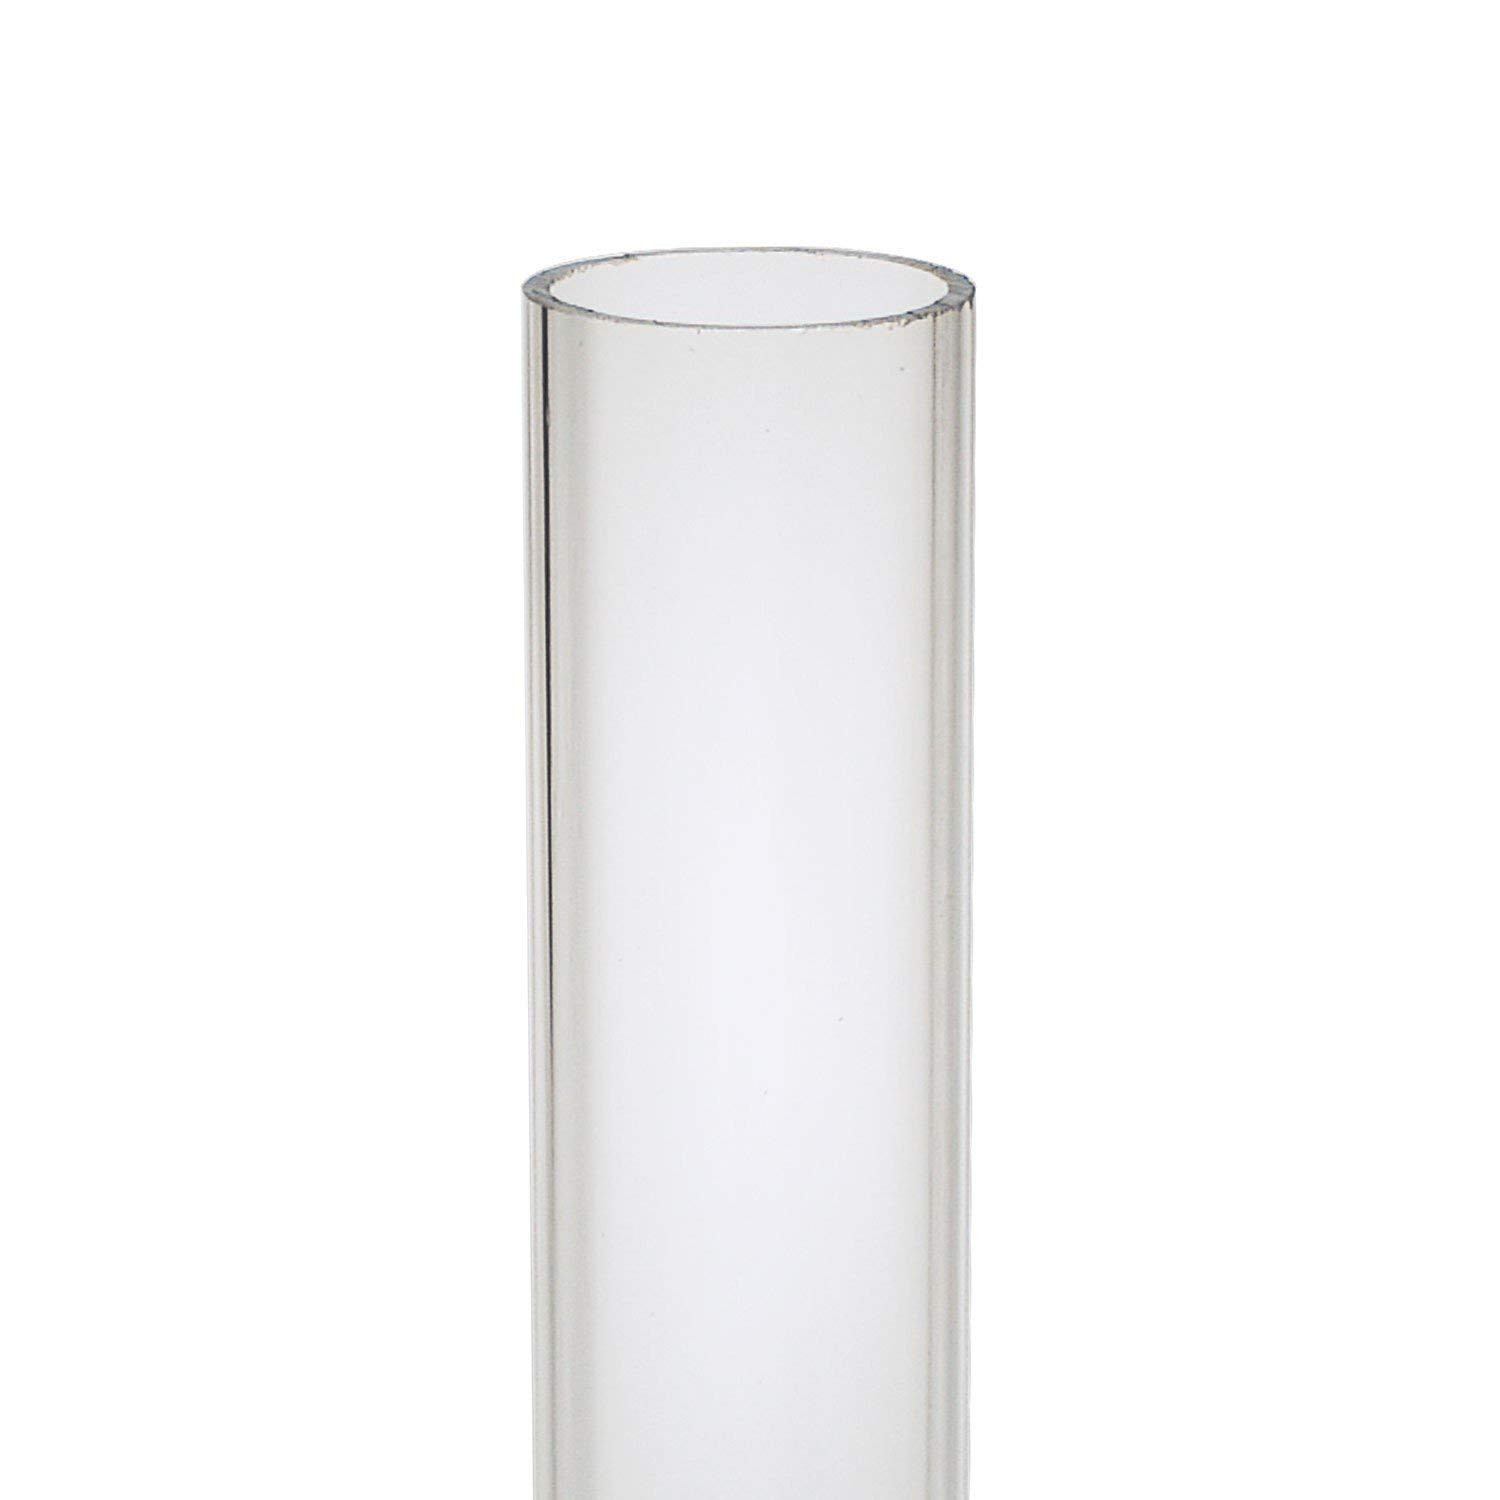 17 Elegant 24 Inch Tall Clear Vases 2024 free download 24 inch tall clear vases of amazon com source one deluxe clear acrylic tube 2 inches thick 24 intended for amazon com source one deluxe clear acrylic tube 2 inches thick 24 inch 2 inch wide 